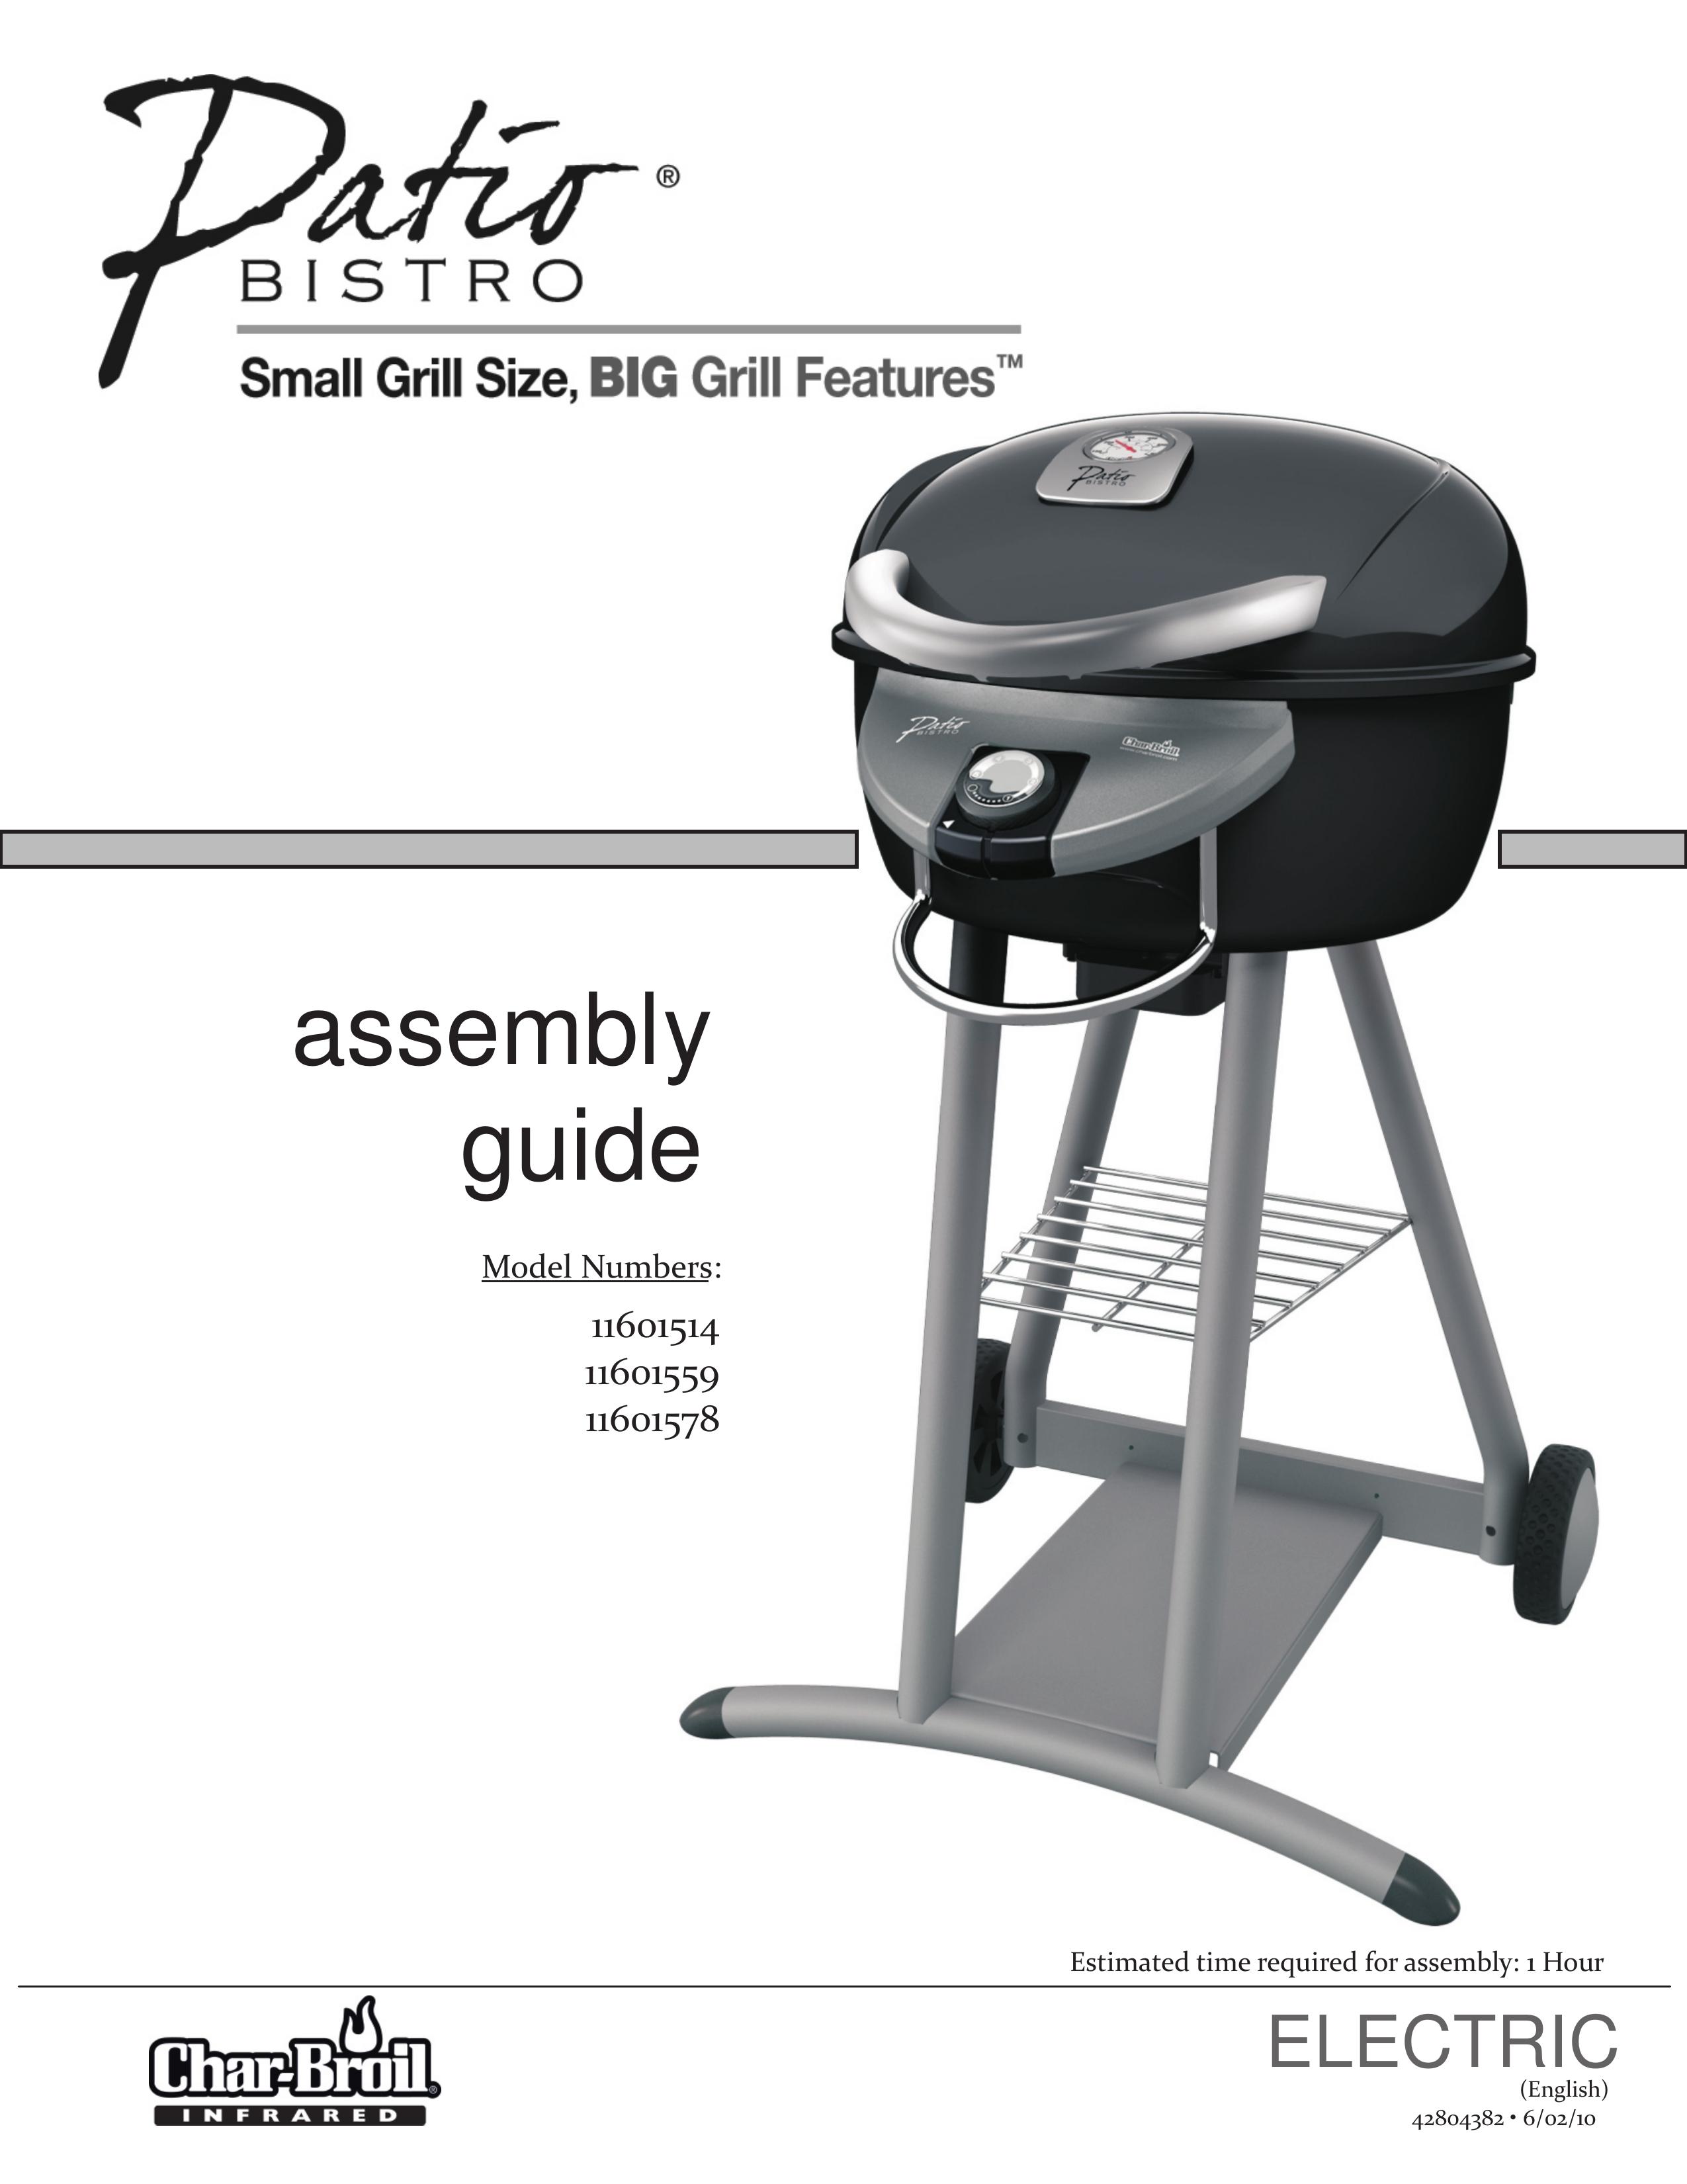 Char-Broil 11601514 Charcoal Grill User Manual